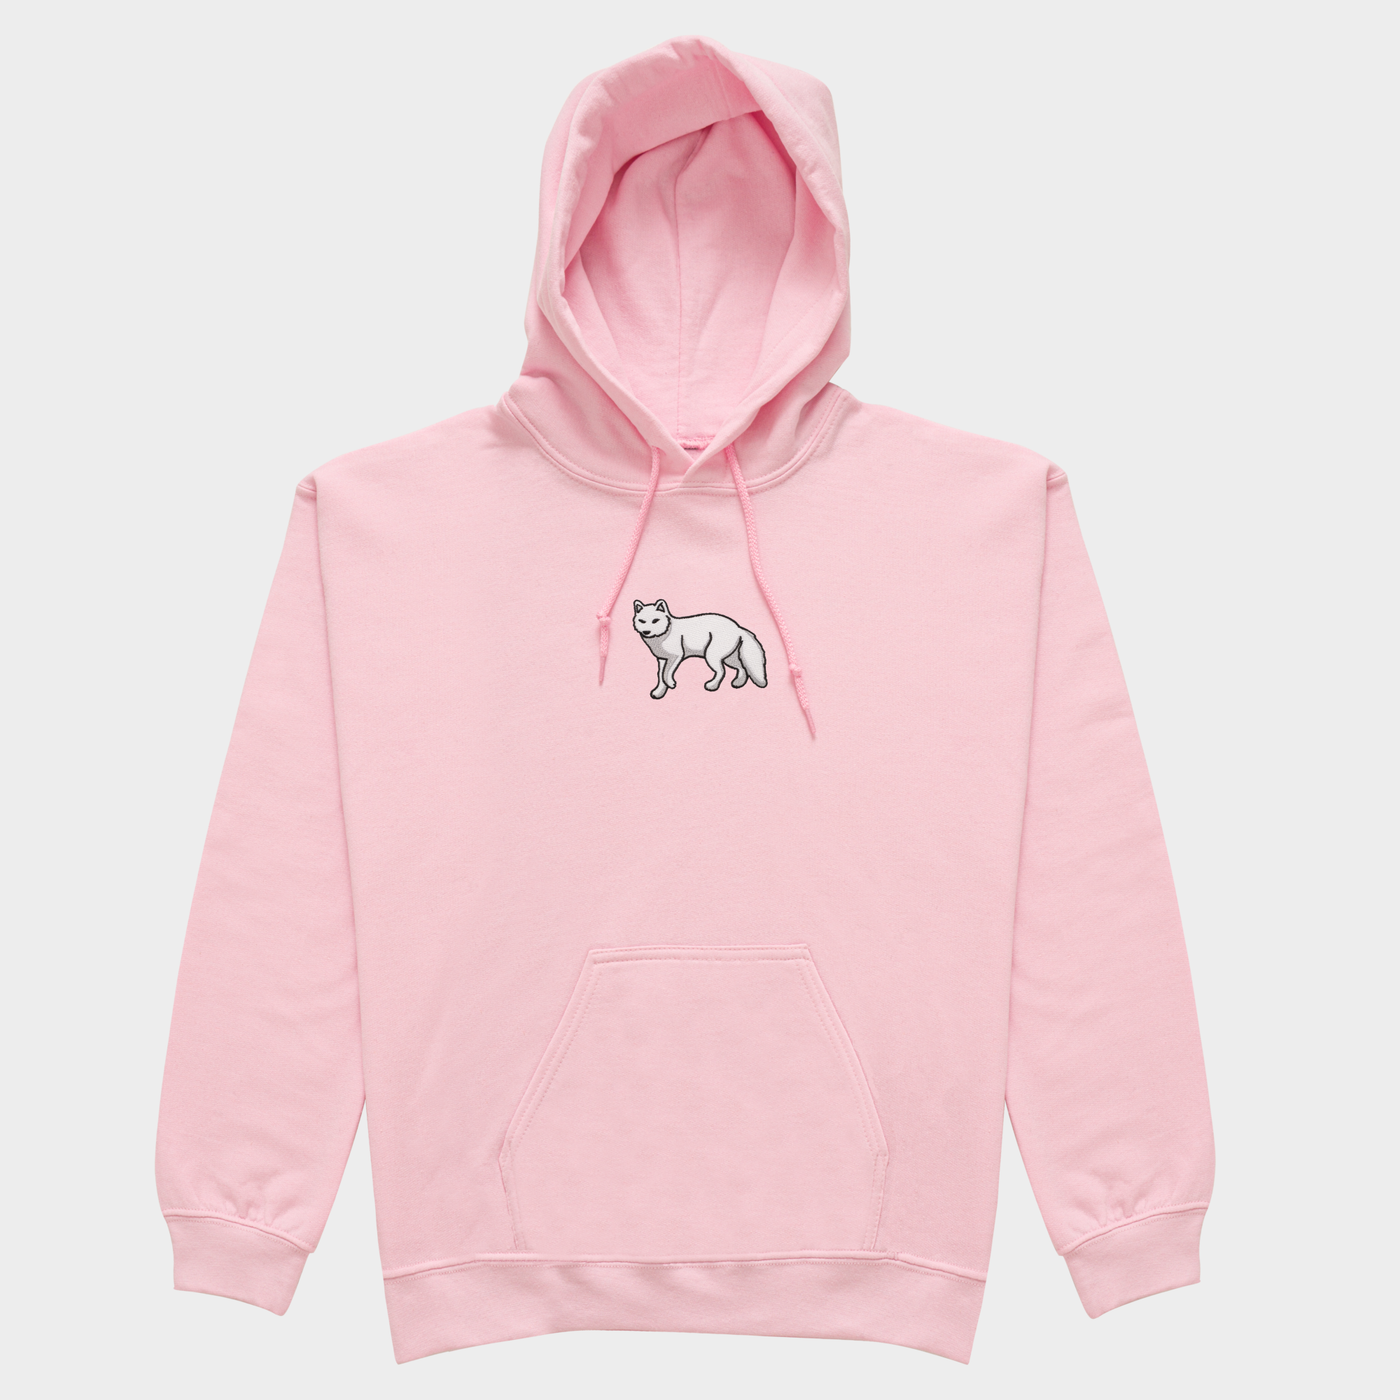 Bobby's Planet Women's Embroidered Arctic Fox Hoodie from Arctic Polar Animals Collection in Light Pink Color#color_light-pink